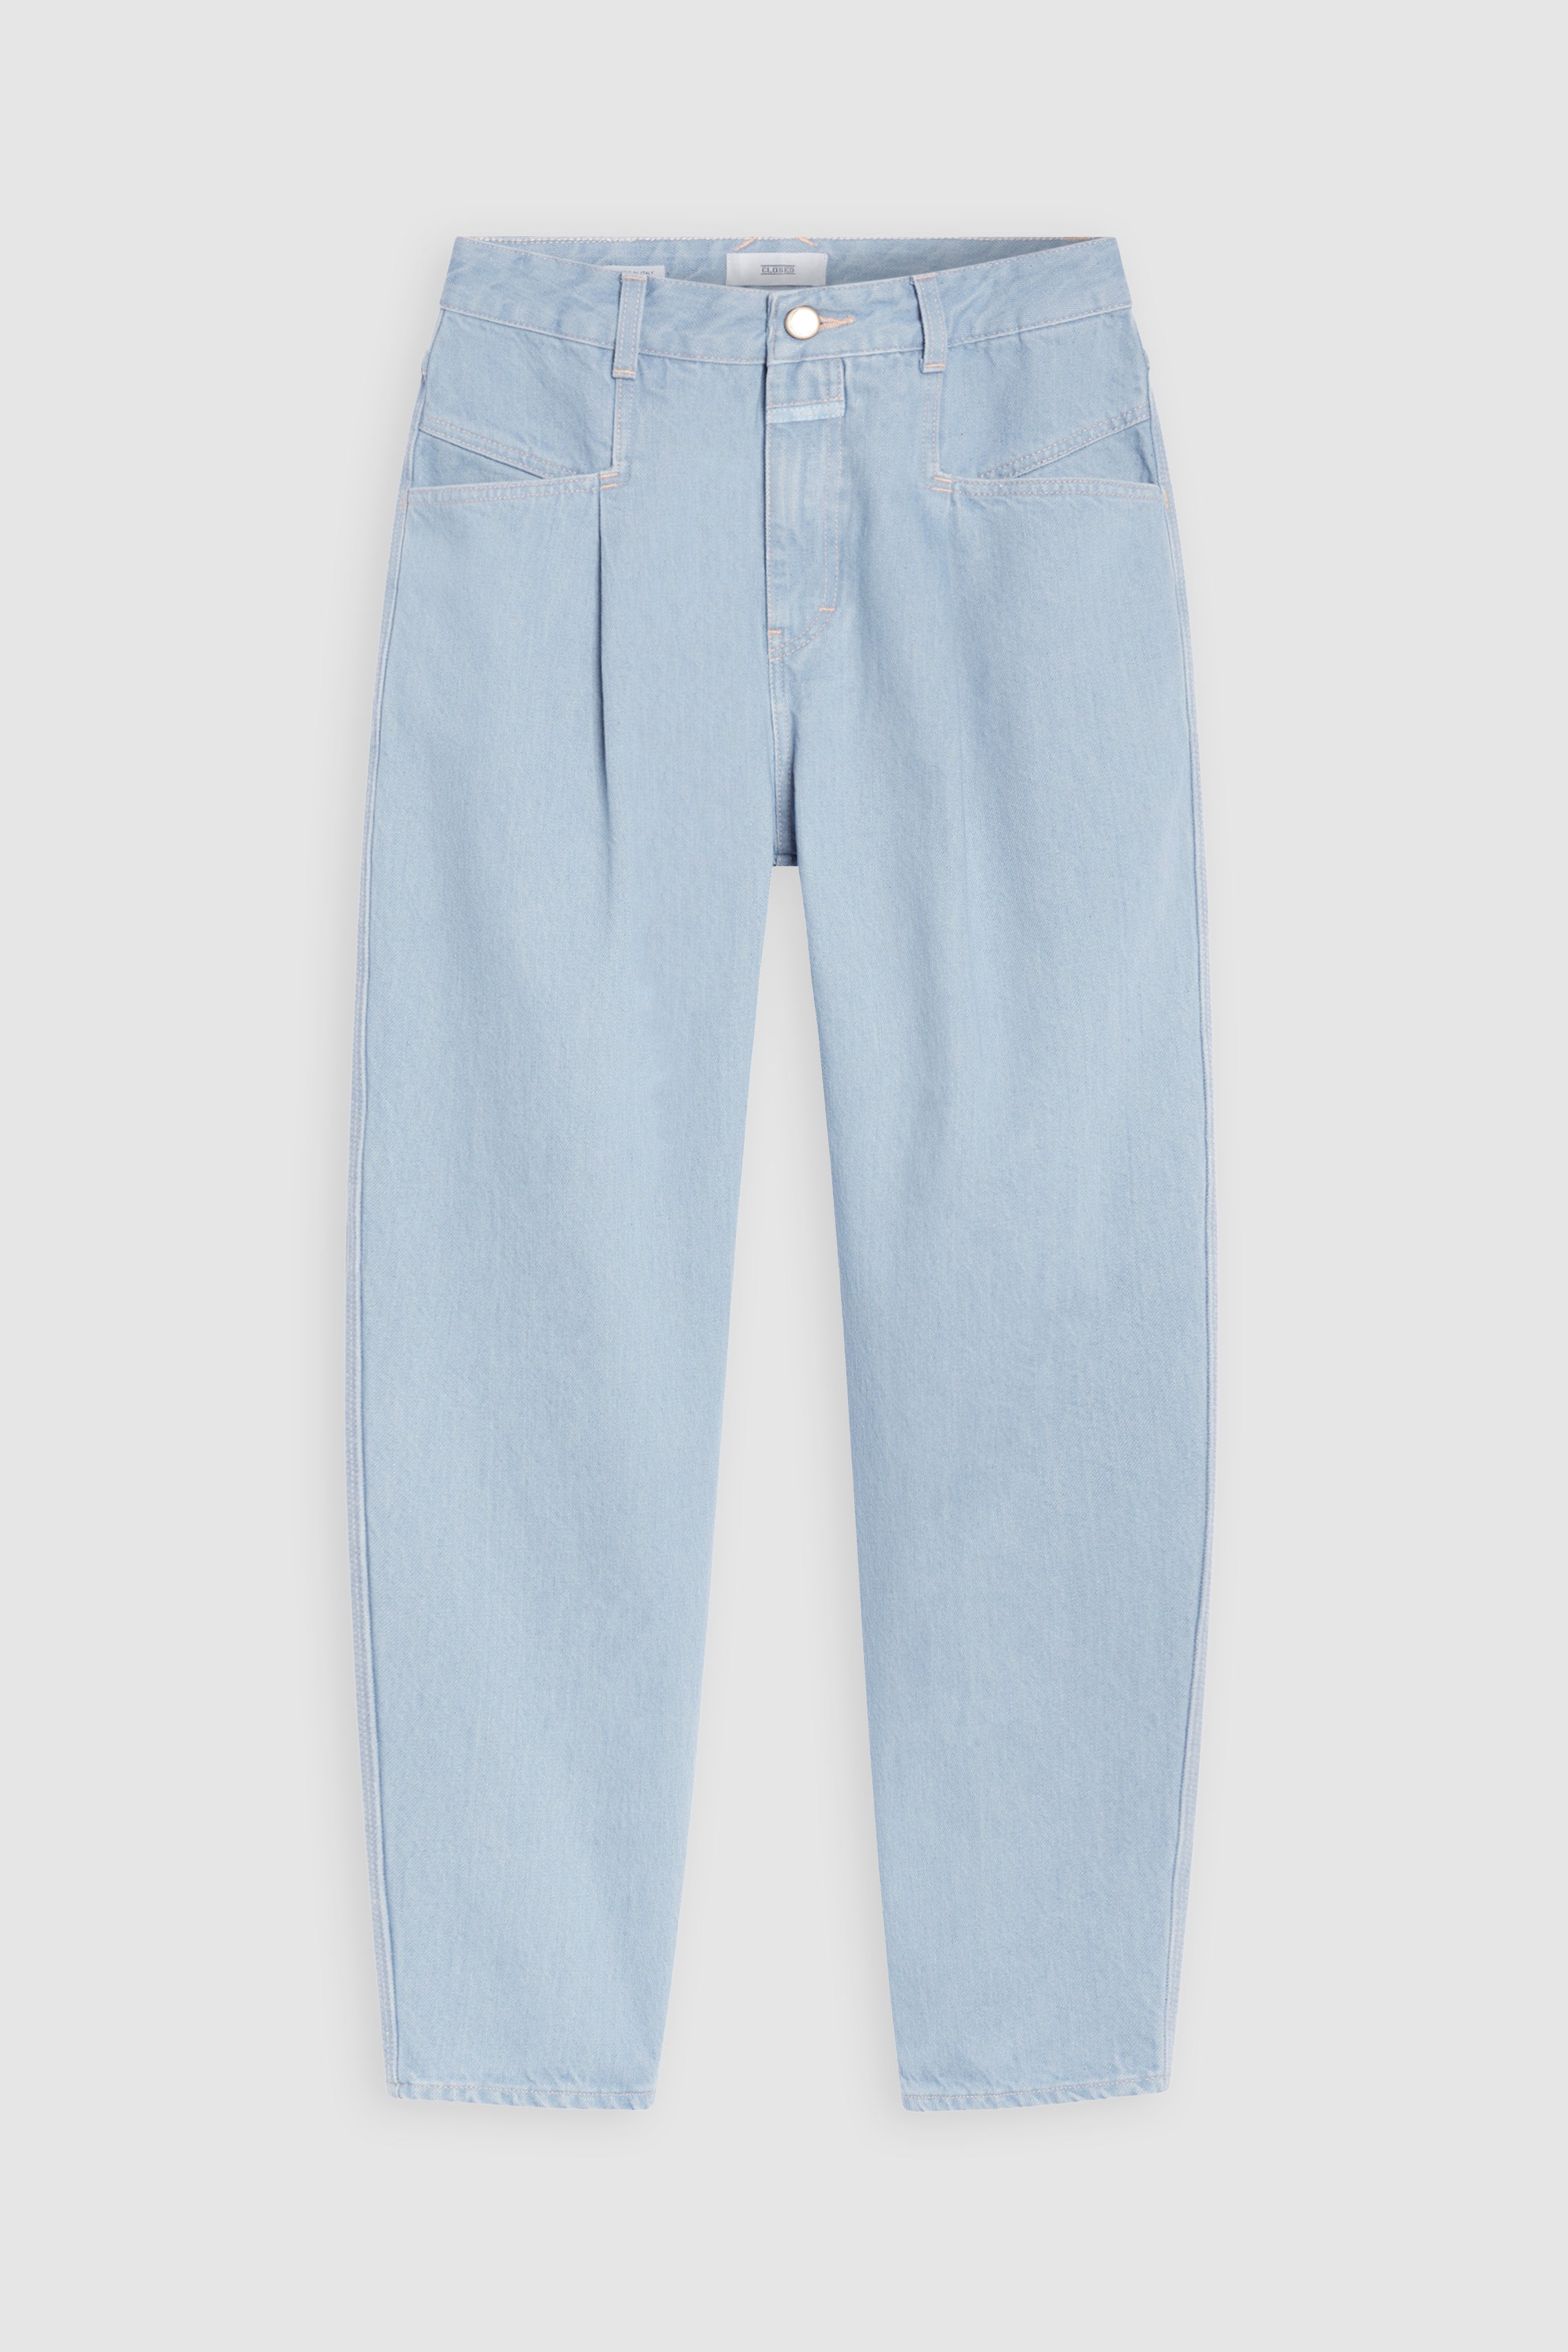 STYLE NAME PEARL JEANS